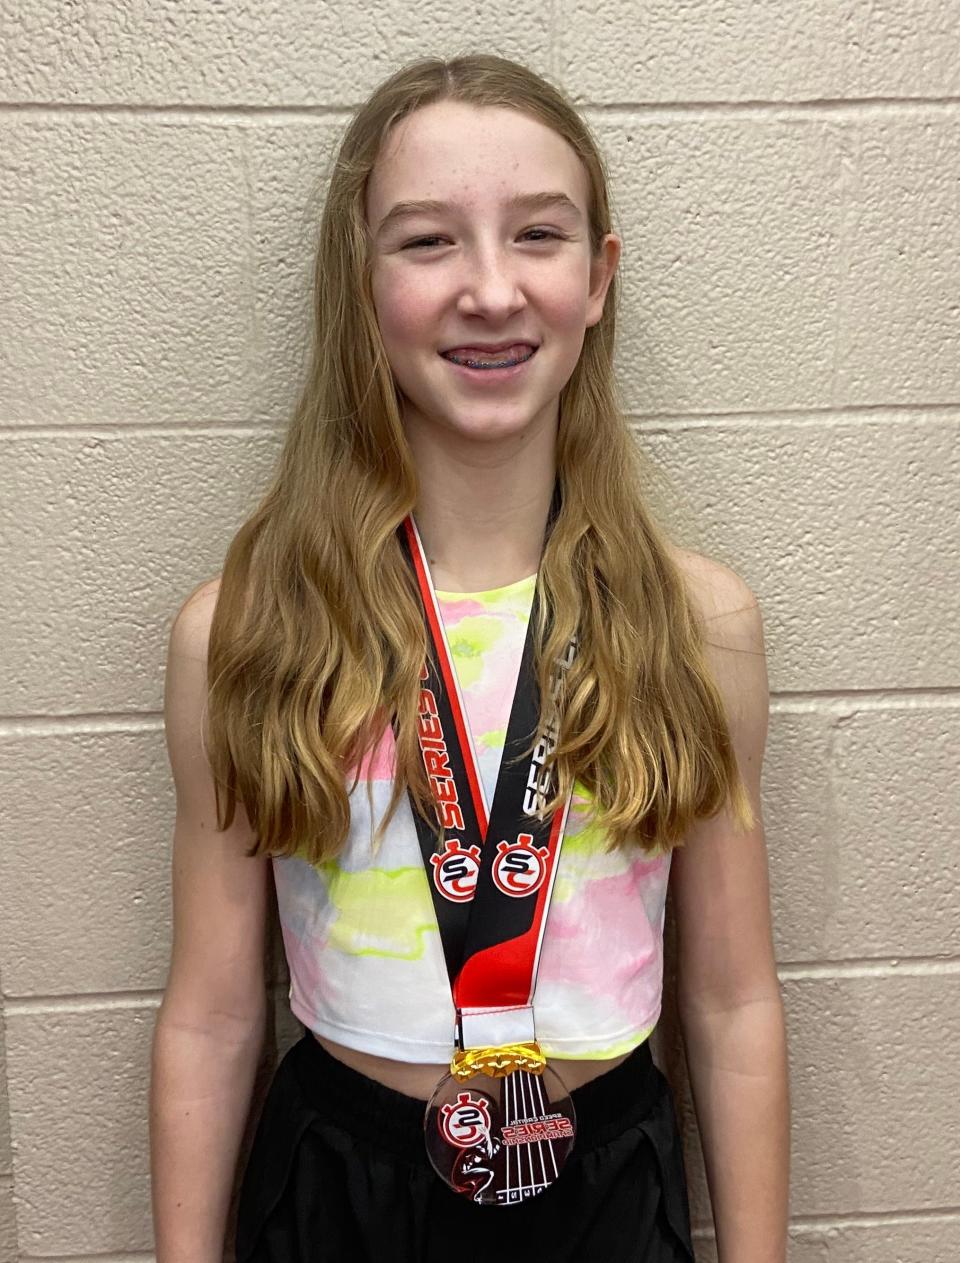 Anna Blodgett is the latest winner of the Advantage Federal Credit Union's Athlete of the Week. She recently posted the second-fastest time among seventh graders in New York state.